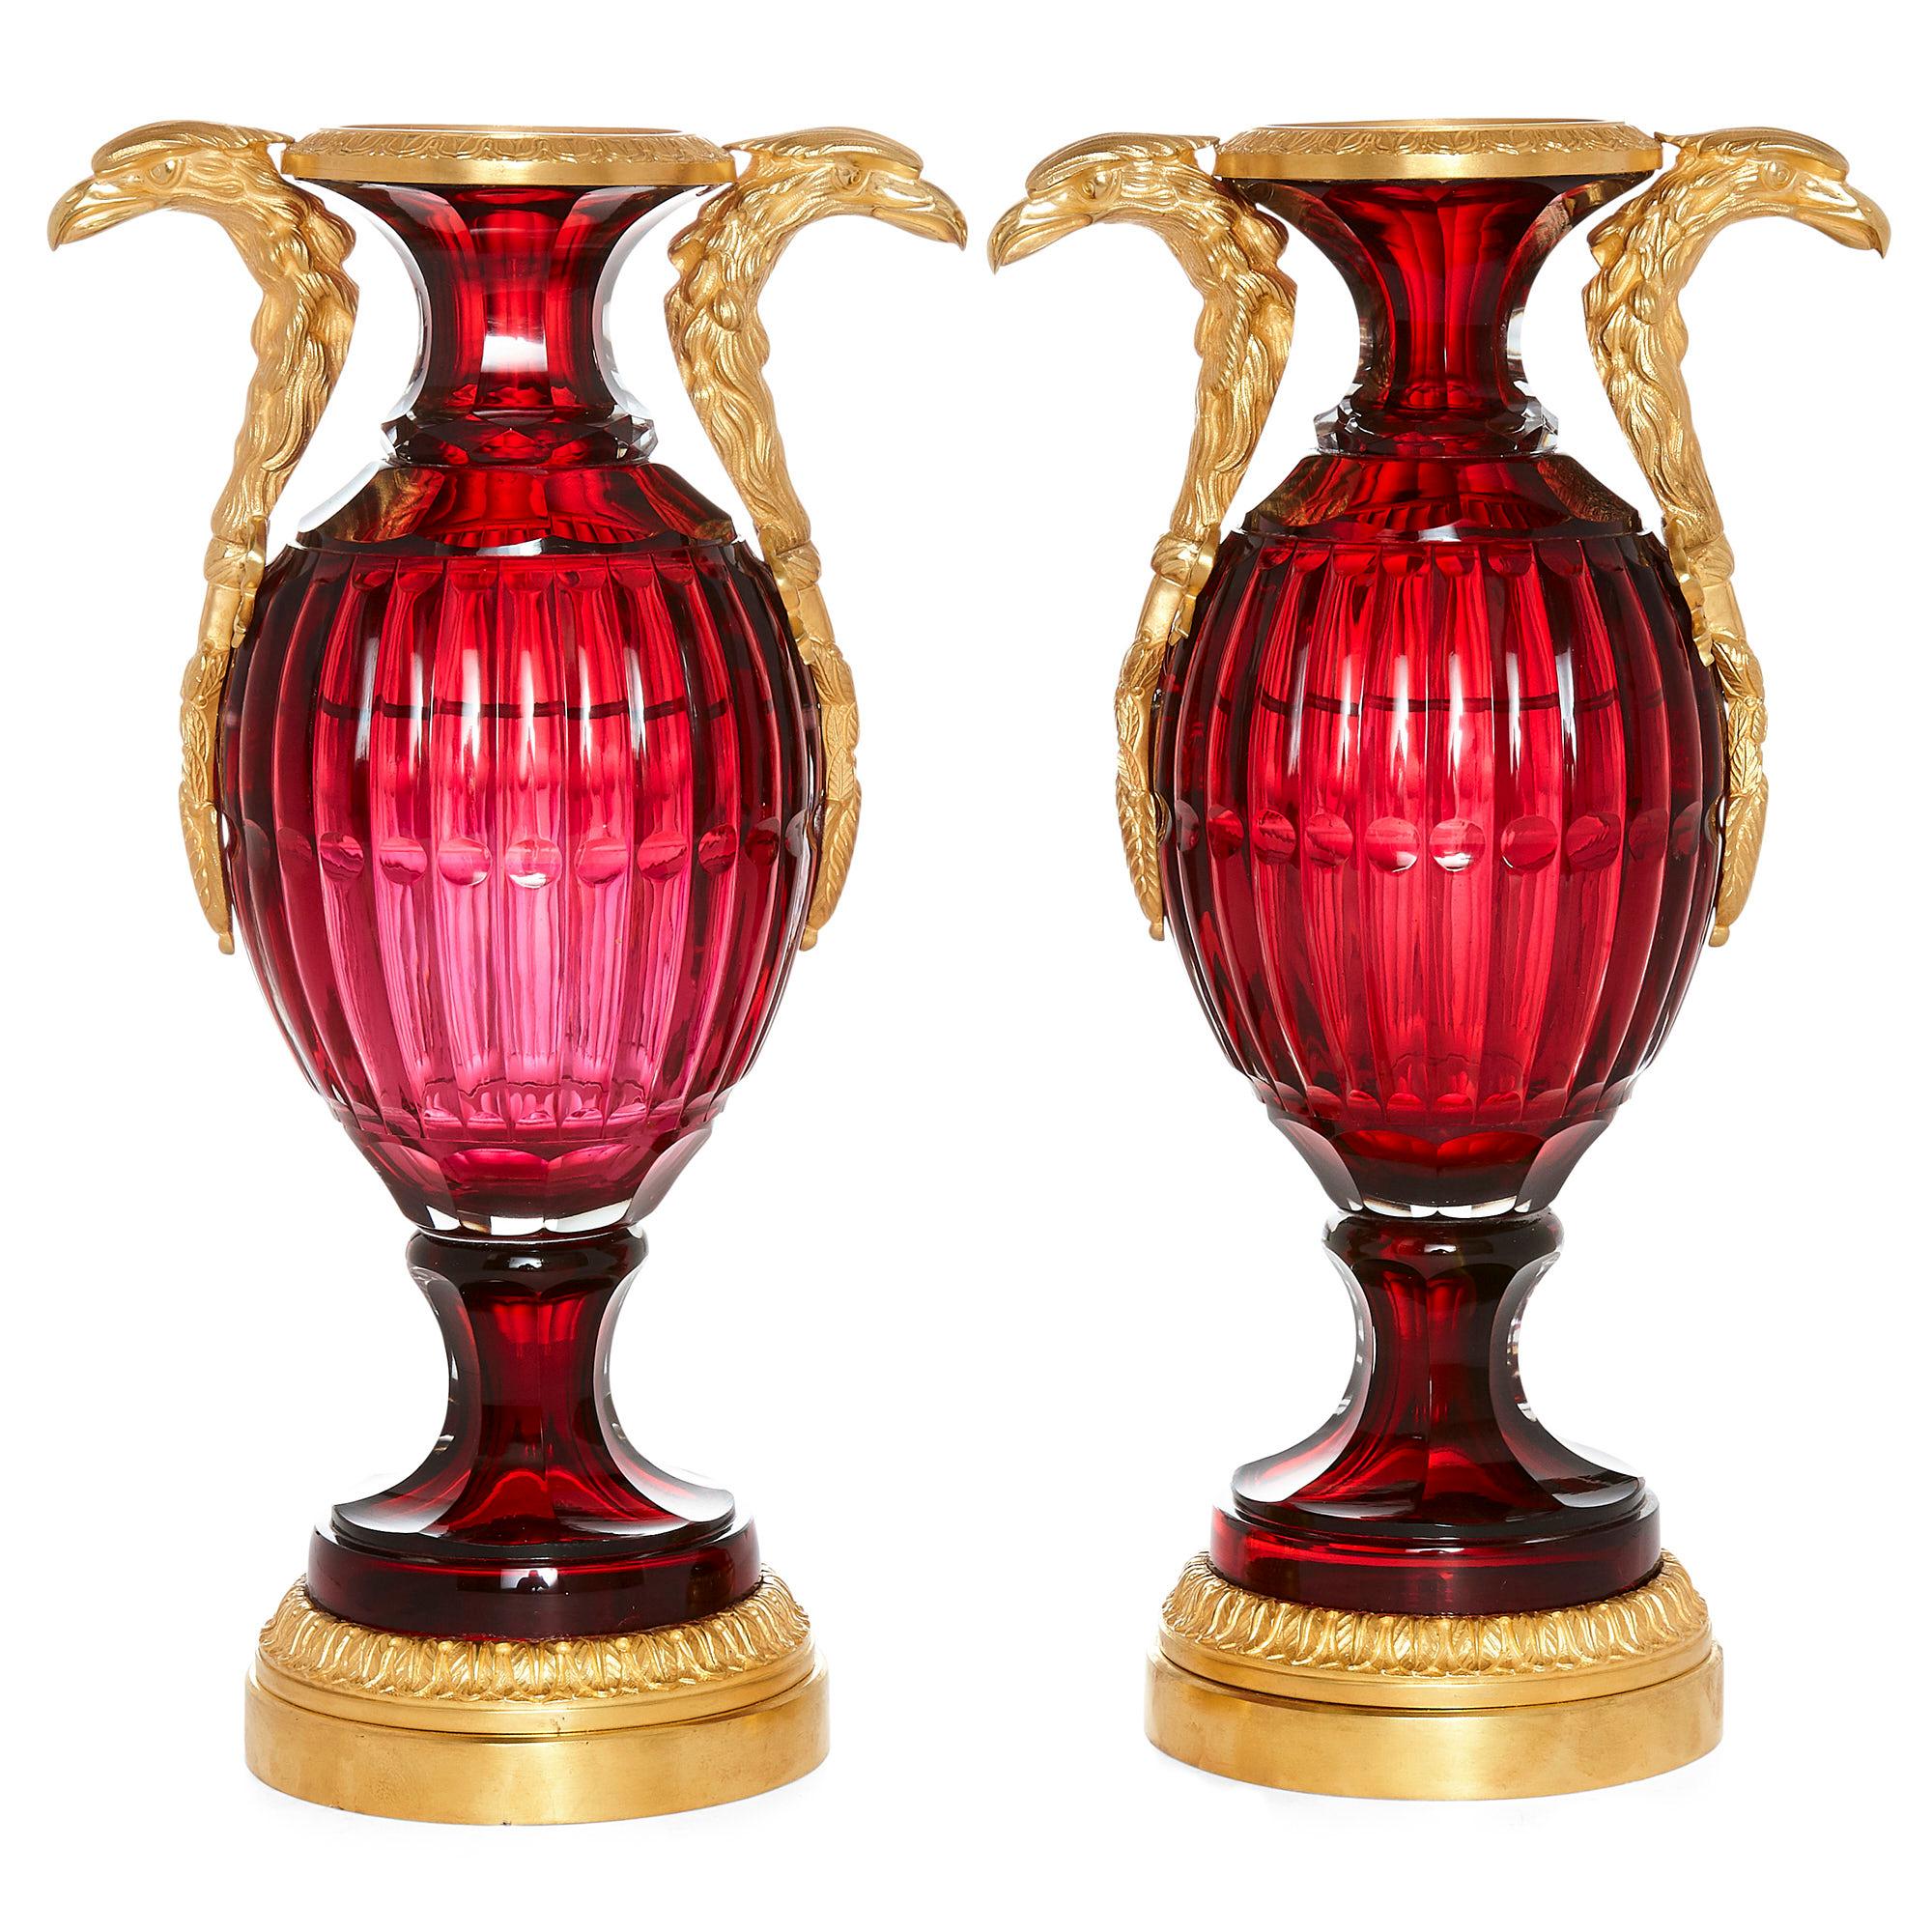 Two neoclassical style Russian cut glass and ormolu vases,
Russian, 20th century
Dimensions: Height 37cm, width 20cm, depth 13.5cm

Each vase has an ovoid ruby coloured cut glass body and a flared neck. They are mounted with twin ormolu handles,